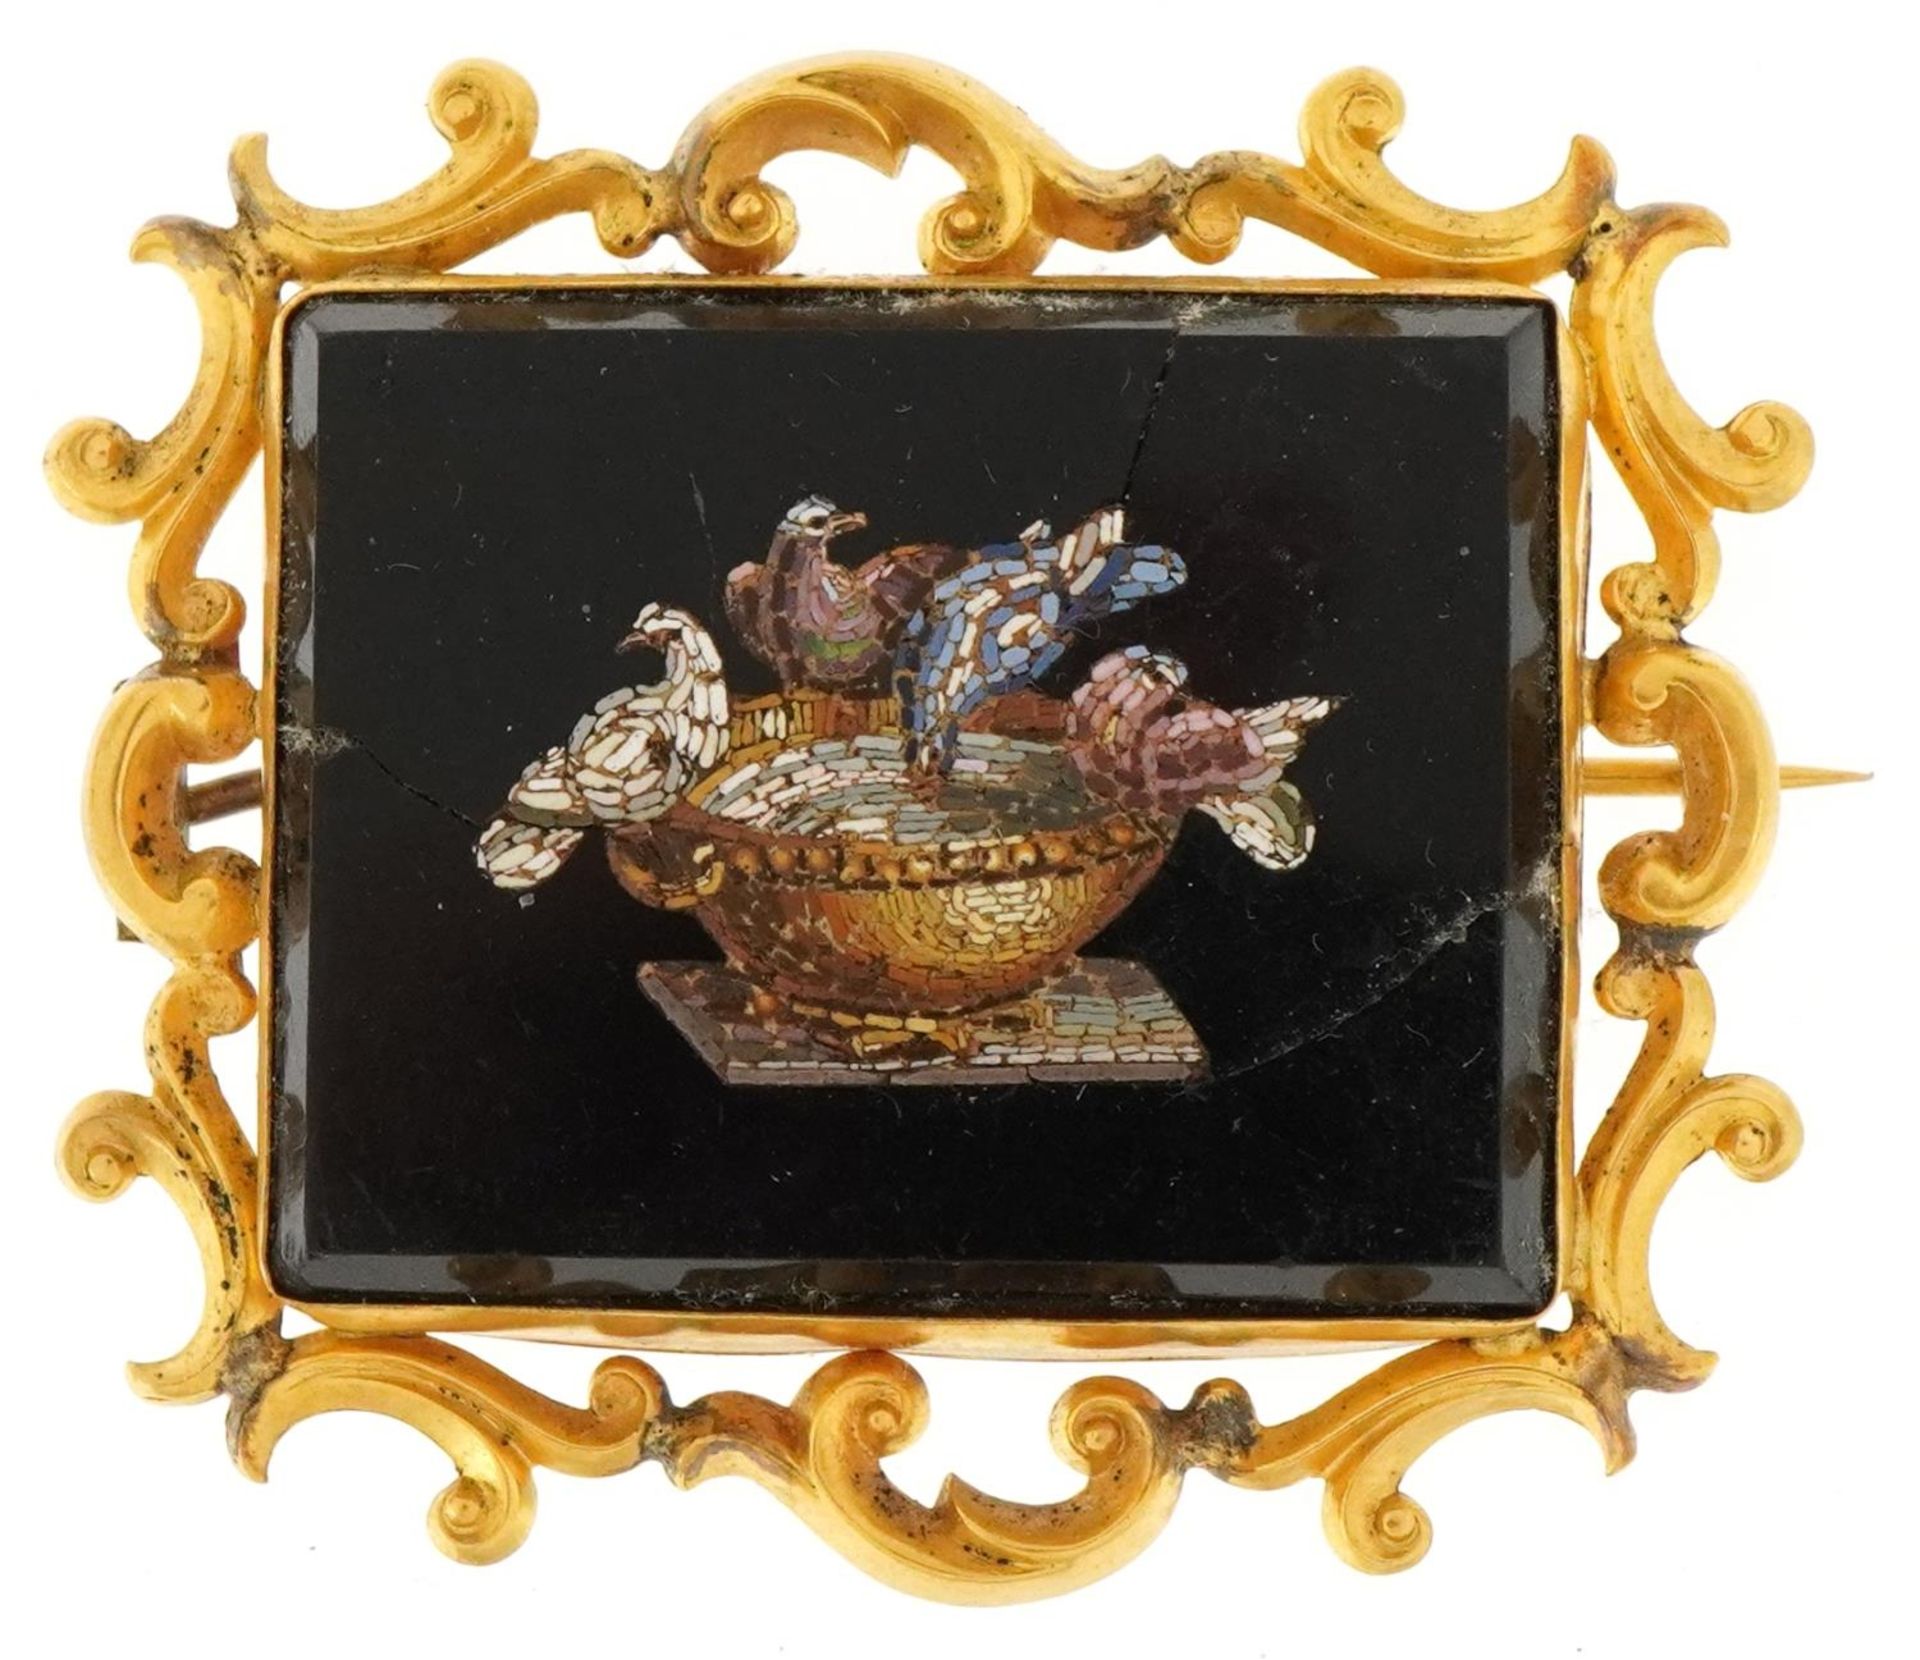 Italian 19th century pietra dura brooch with yellow metal mount decorated with birds around a